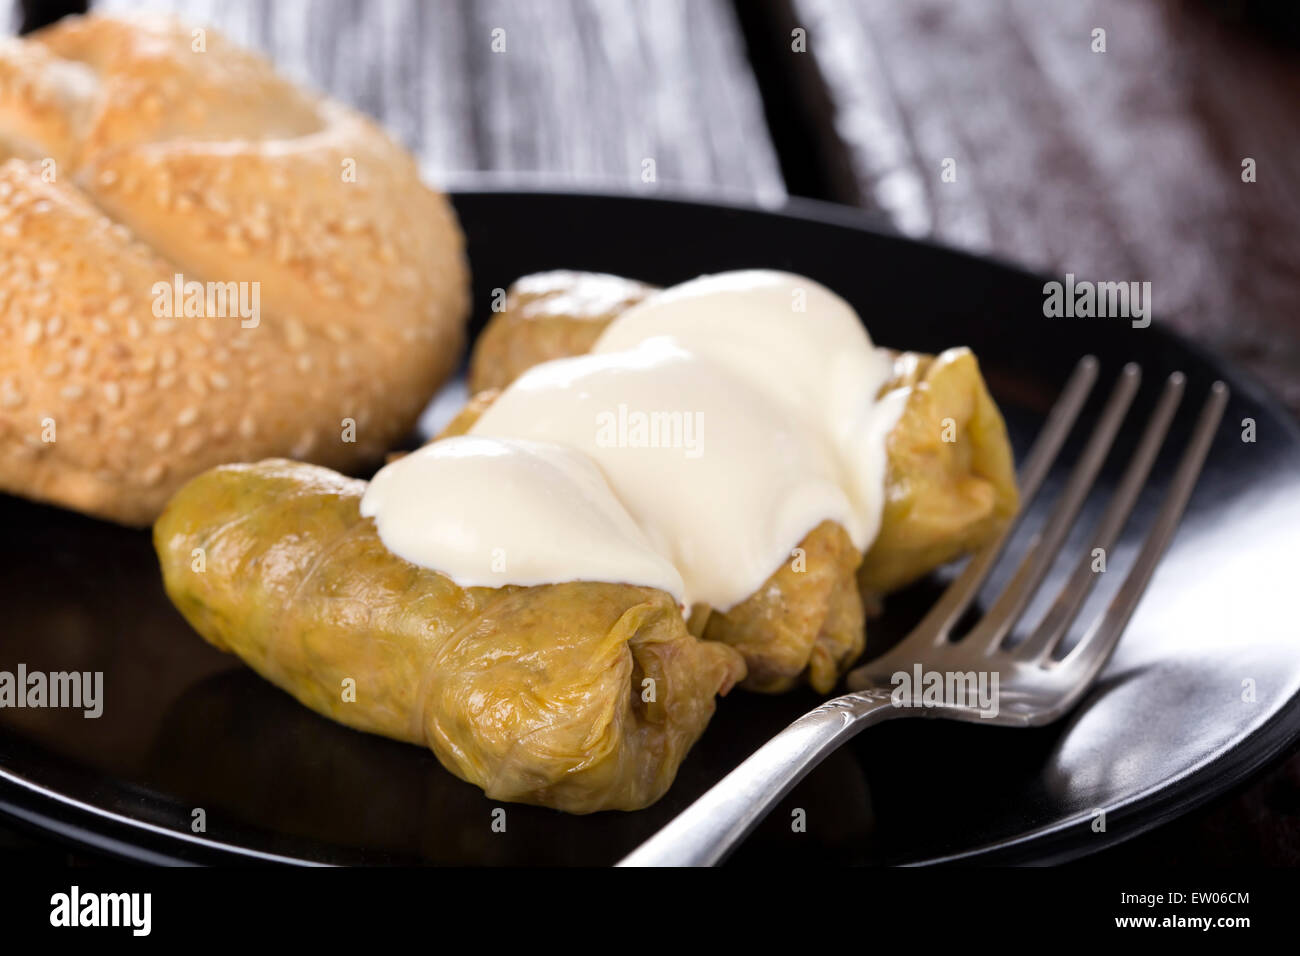 Cabbage rolls filled with minced meat and rice on plate with bread, over wooden table Stock Photo